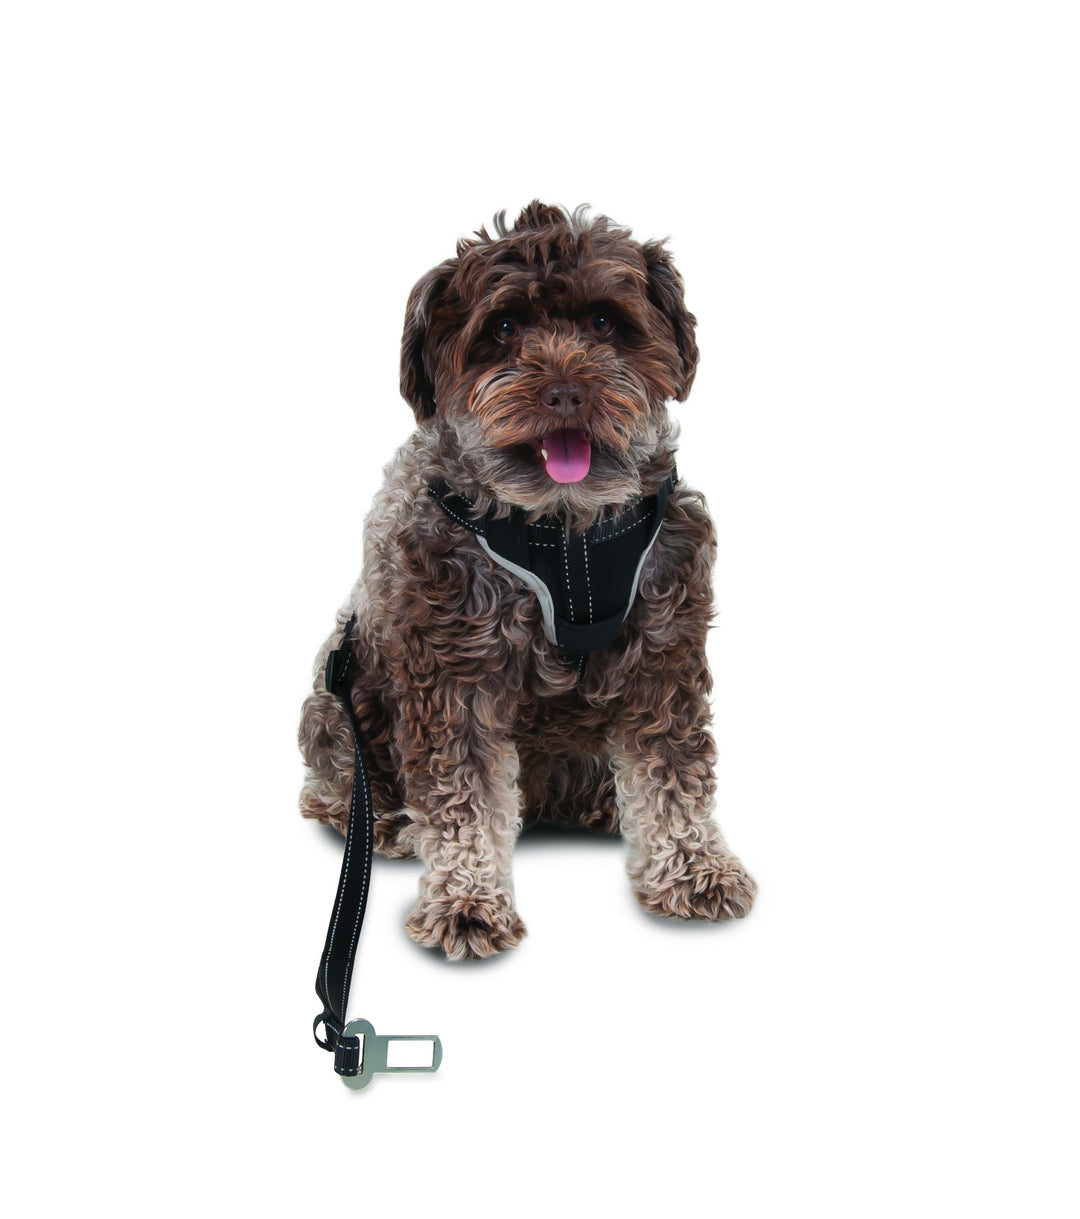 Petmate 11475 The Ultimate Travel Harness for Pets, X-Small, Black